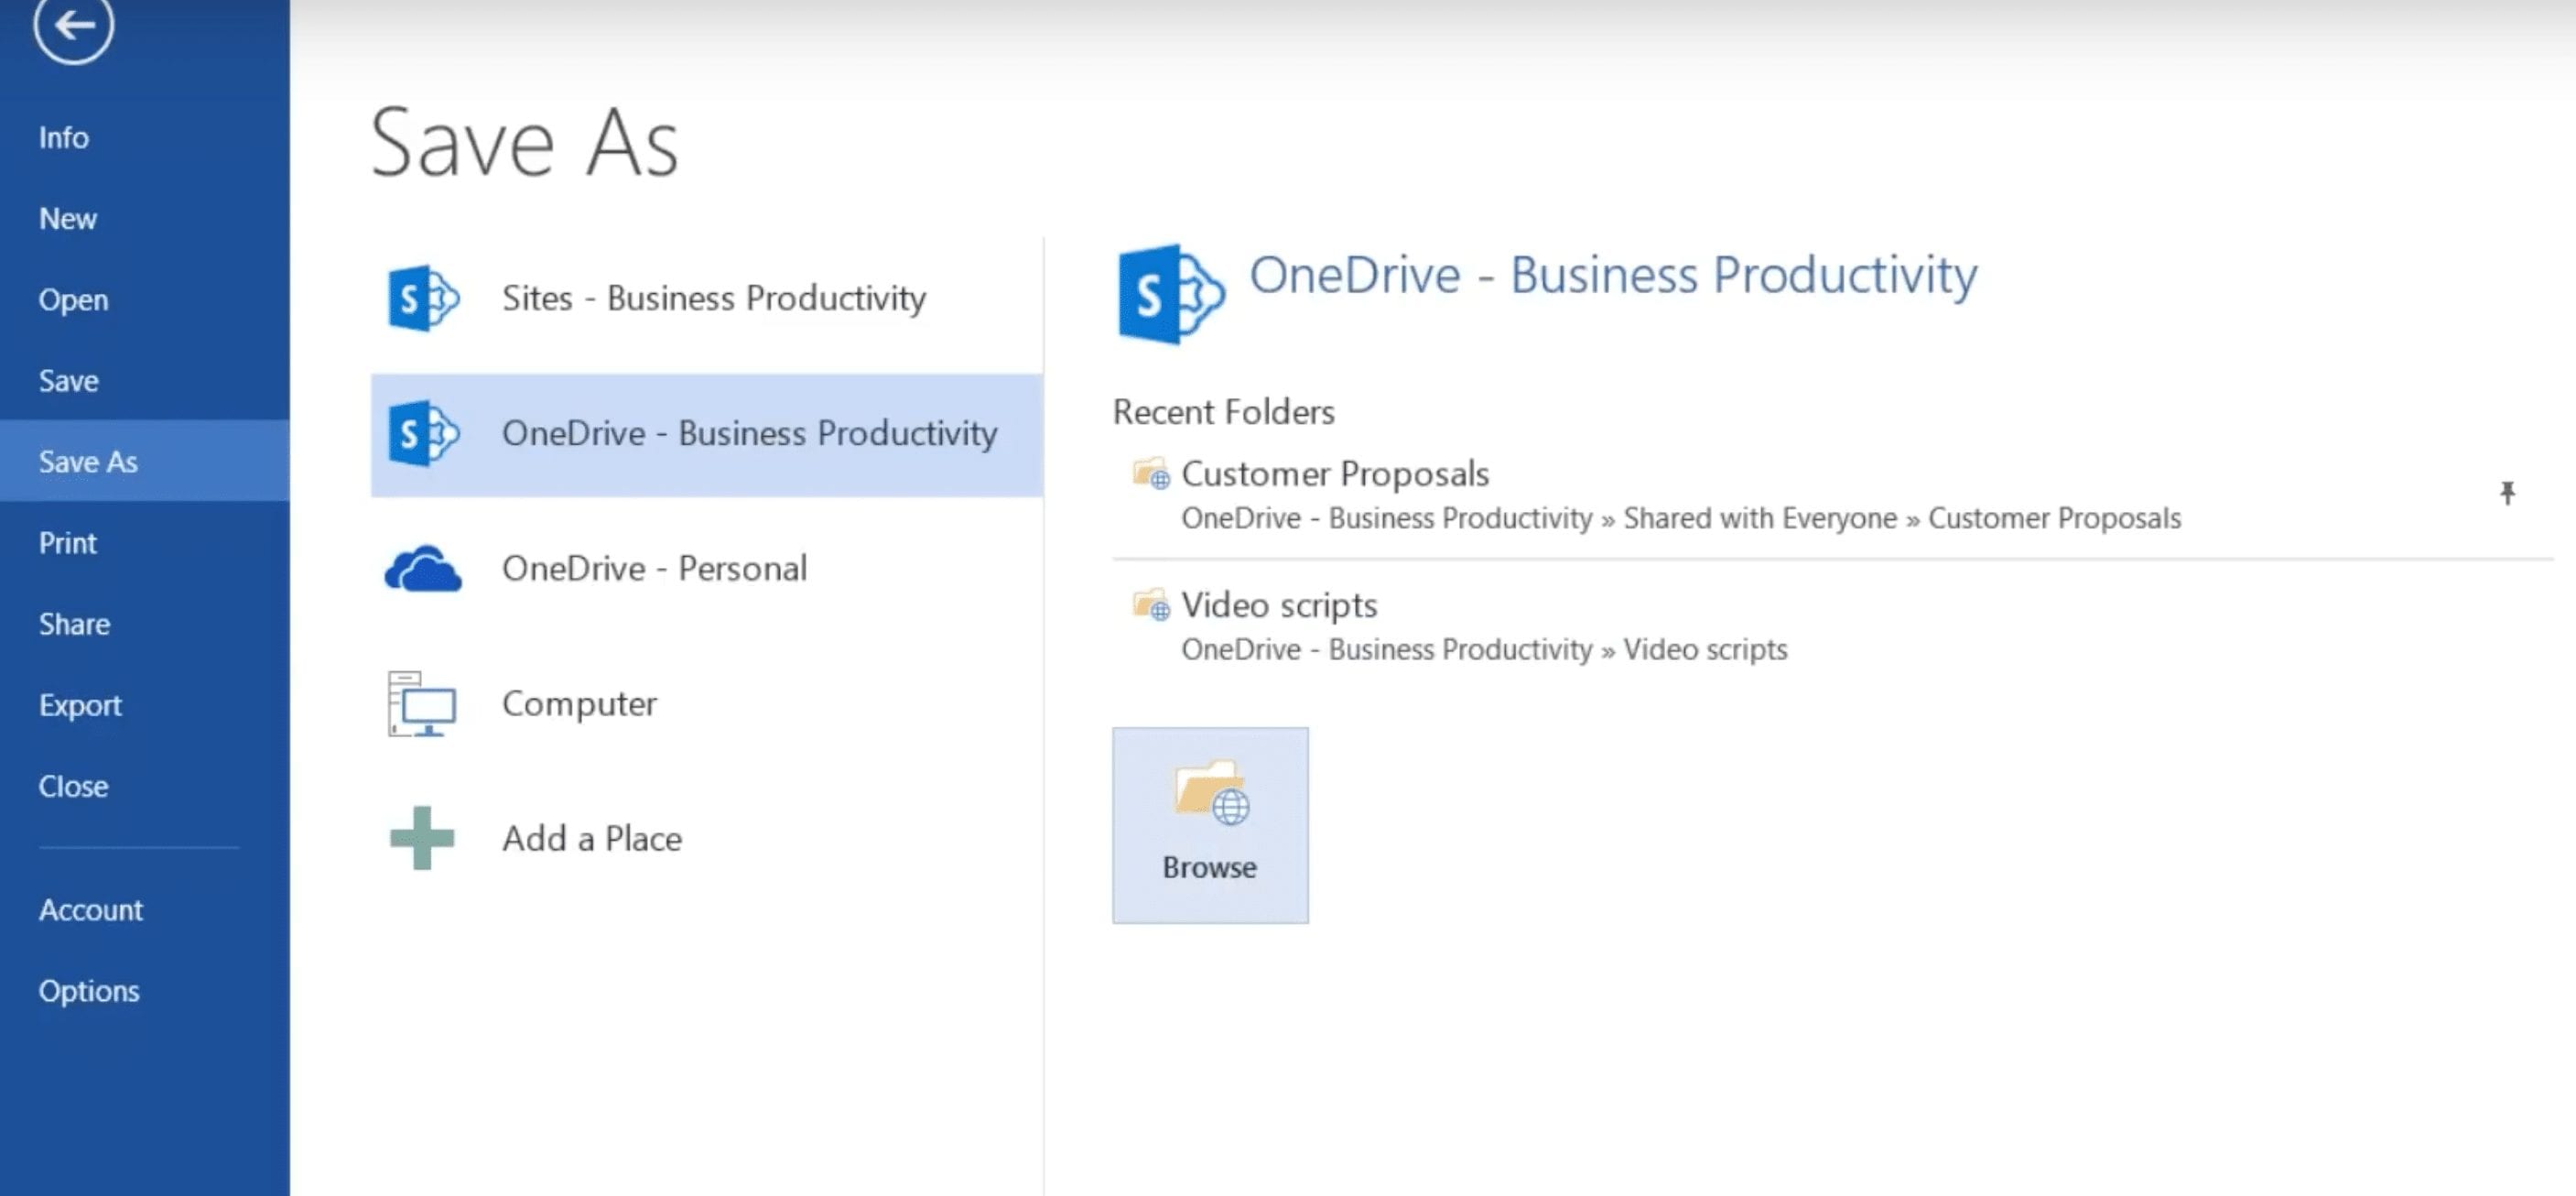 Use OneDrive to save files to the cloud and then co-author those files